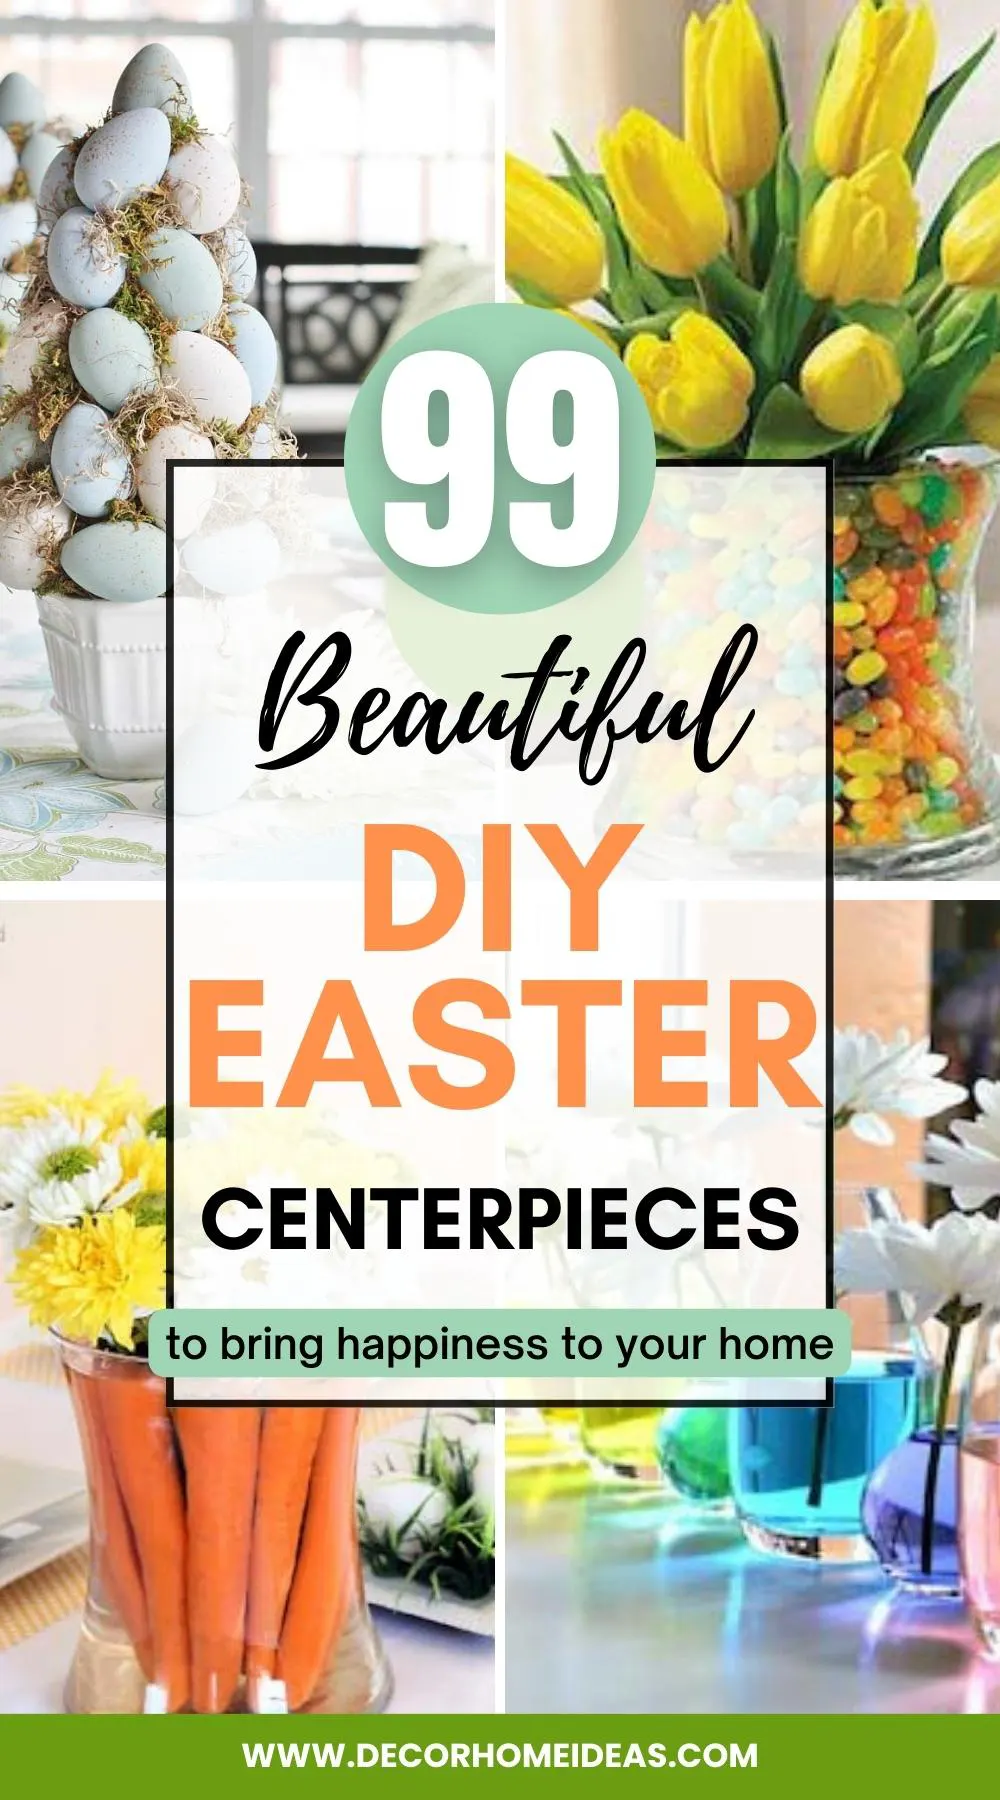 DIY Easter centerpieces are a perfect way to add a festive and colorful touch to your holiday table and impress your guests. From simple flower arrangements to creative egg displays, these centerpieces allow you to showcase your creativity and craftiness, and create a welcoming and joyful atmosphere for the occasion.